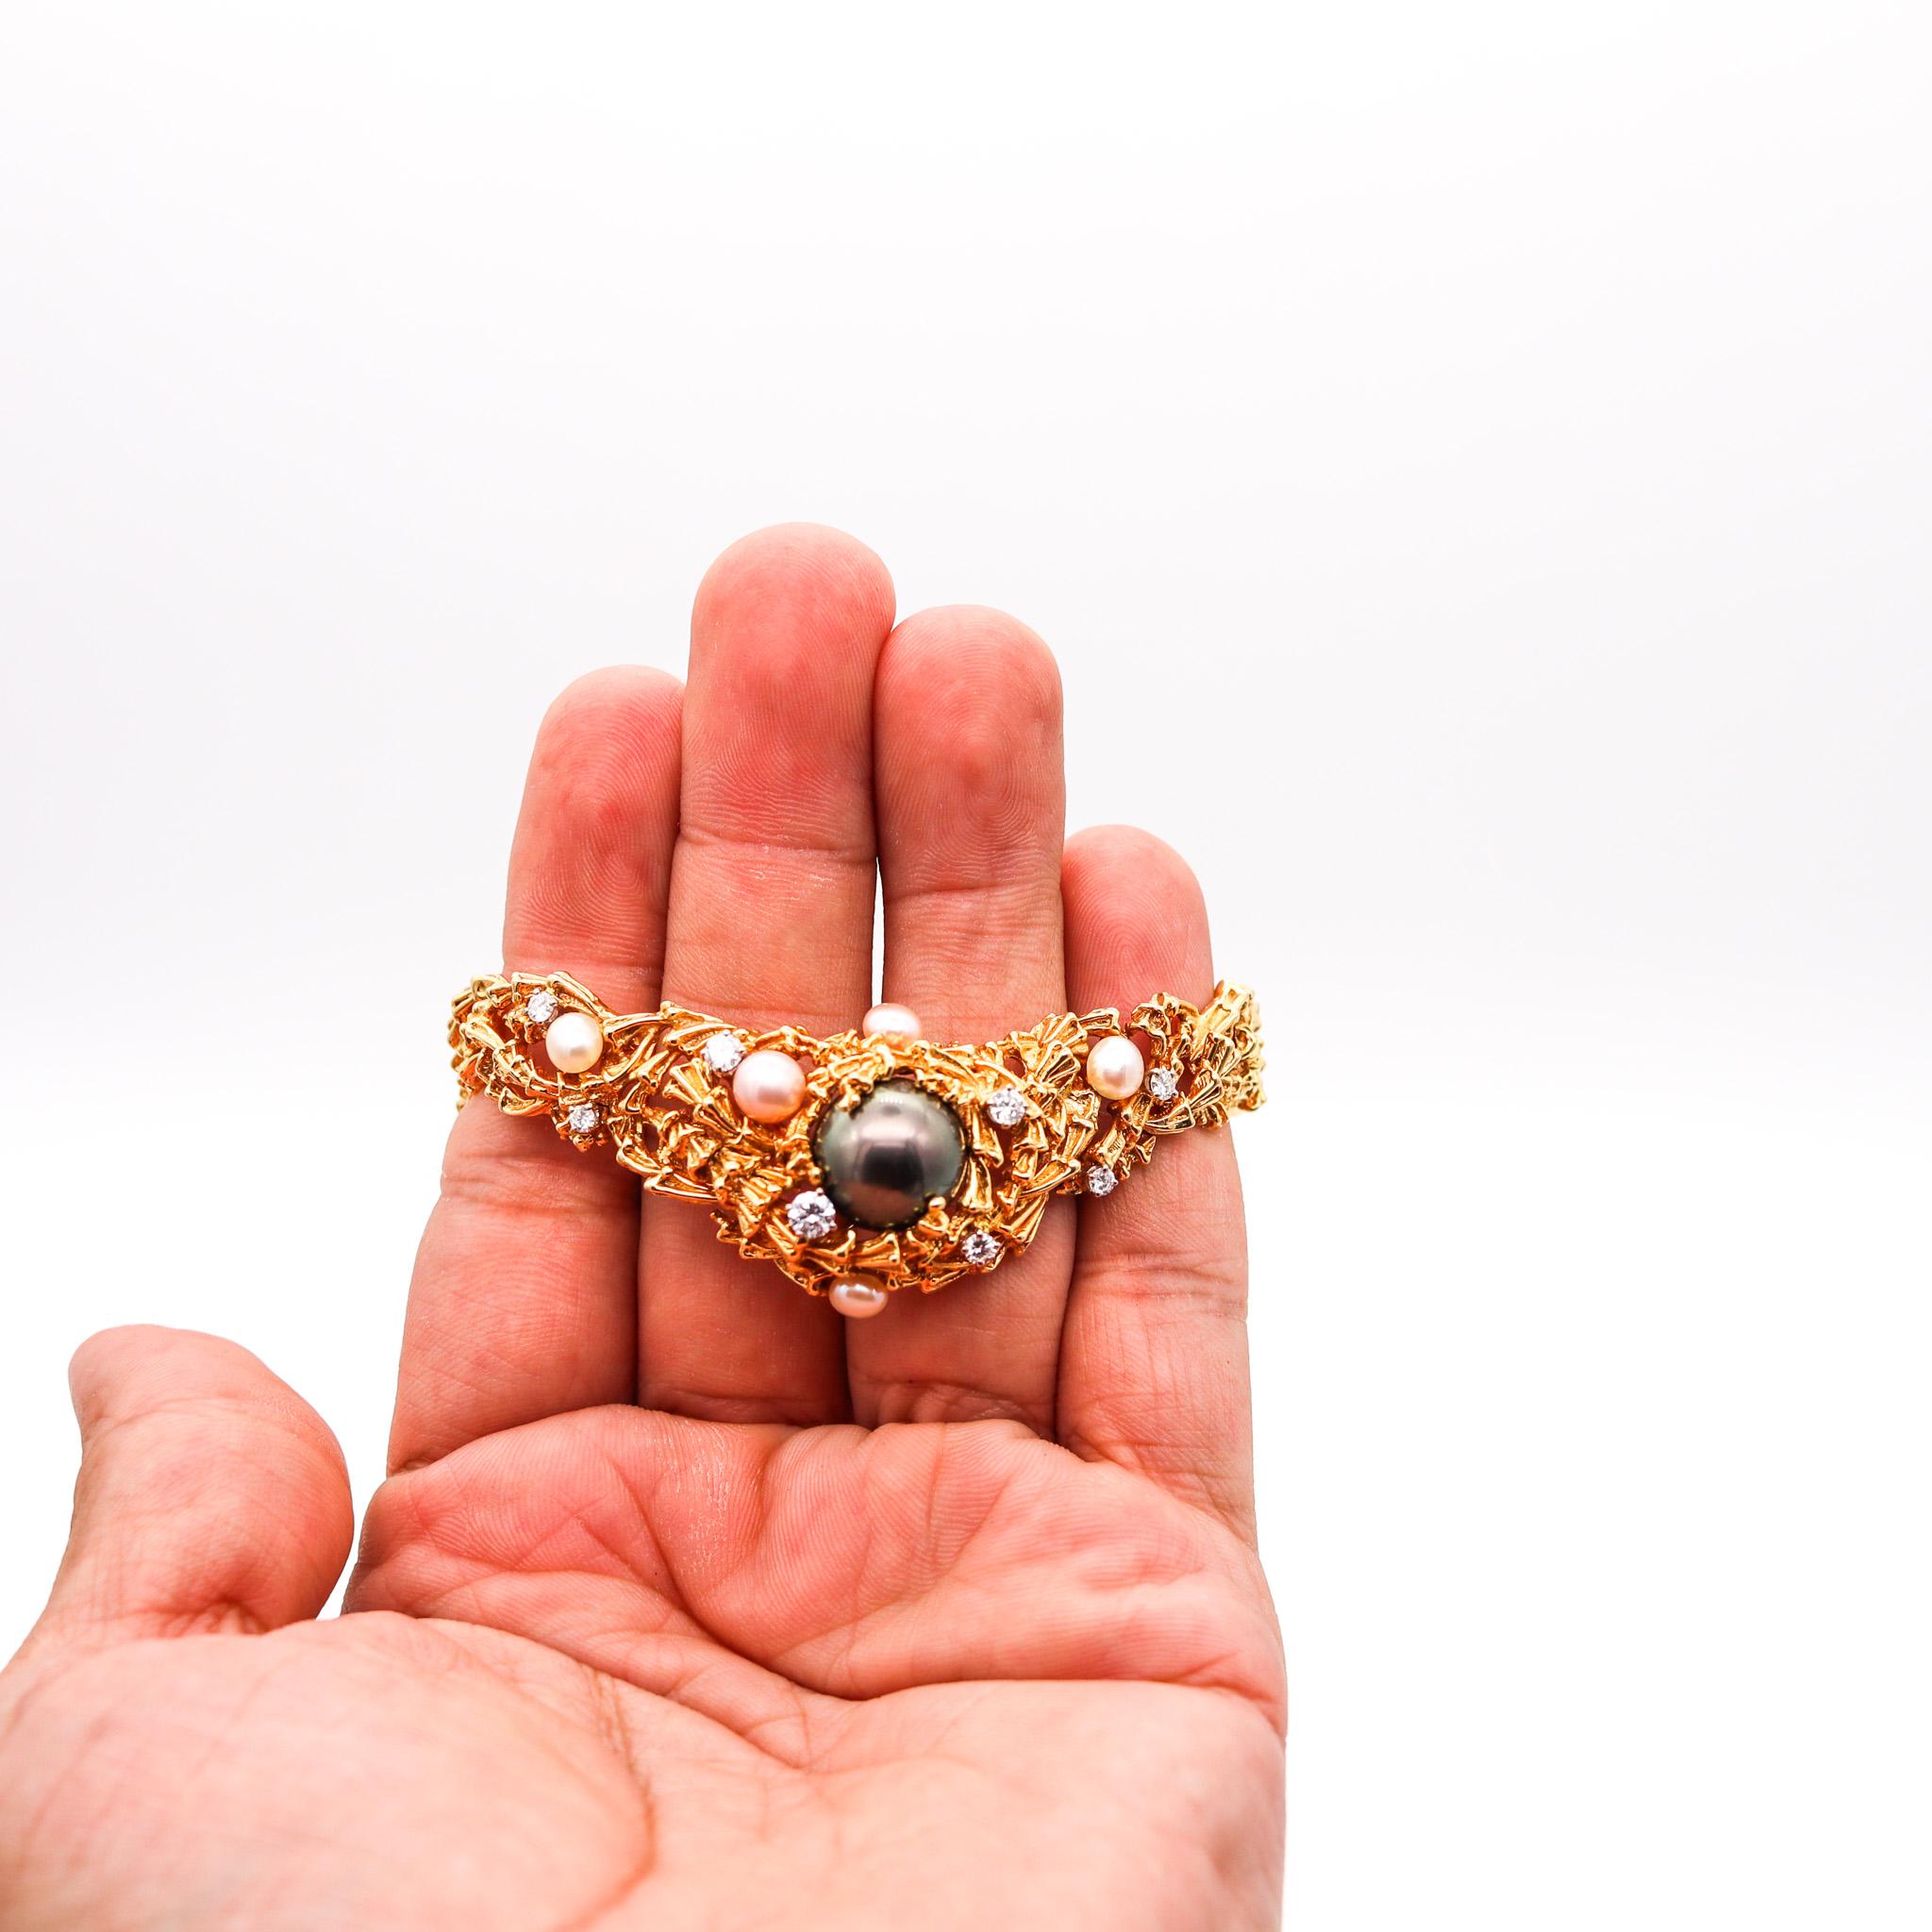 Gilbert Albert 1970 Organic Bracelet In 18Kt Yellow Gold With Diamonds And Pearl In Excellent Condition For Sale In Miami, FL